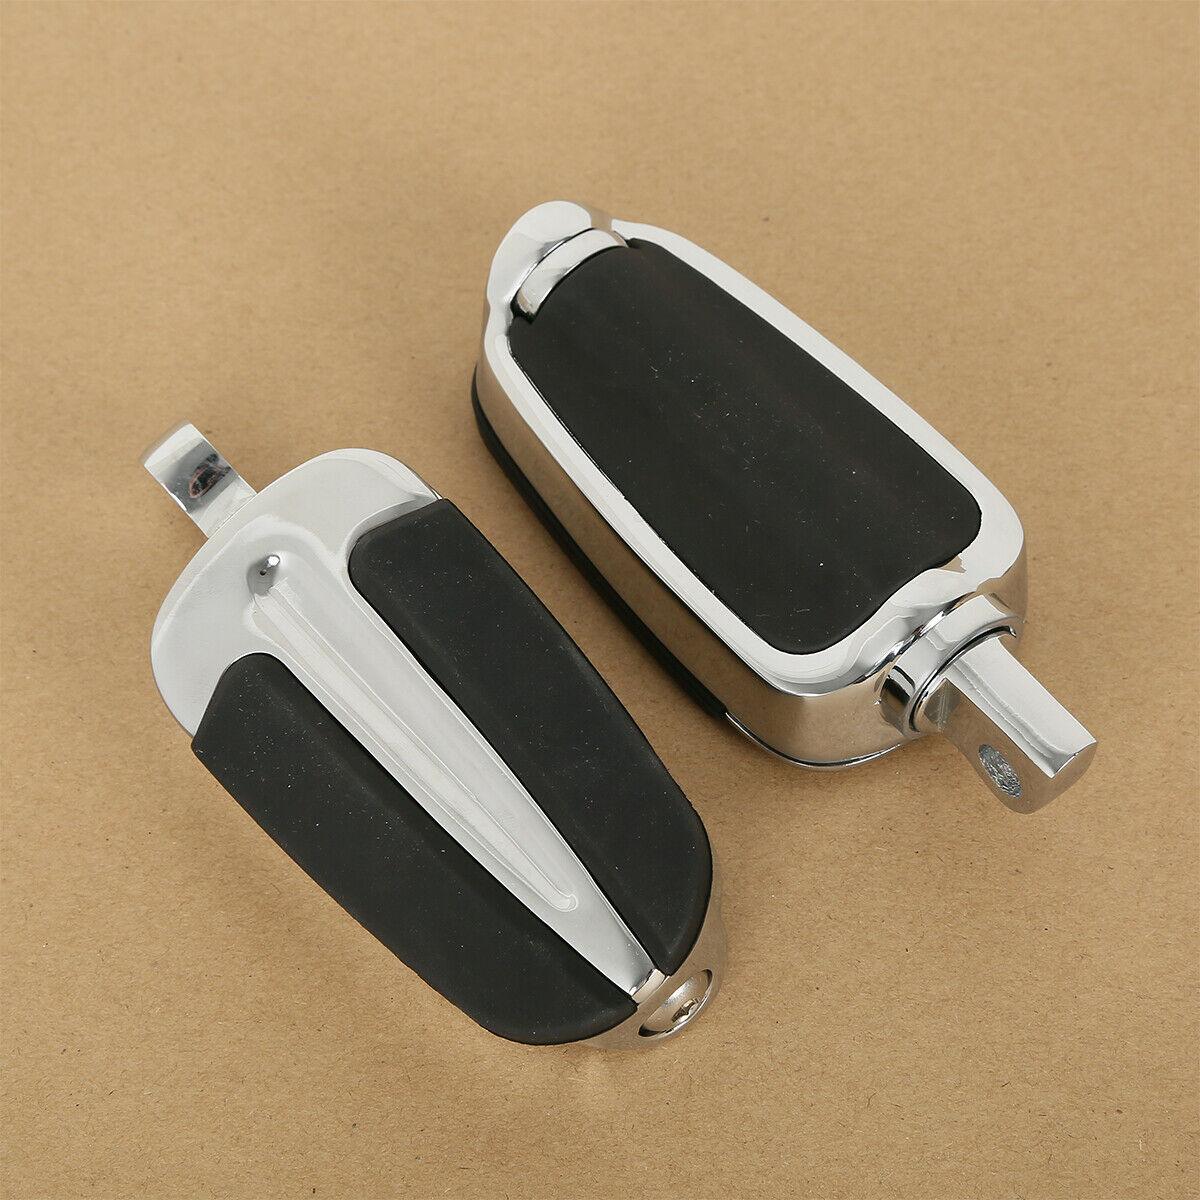 10mm Male Mount-style Footpeg Footrest Fit For Harley Touring Softail Fat Boy US - Moto Life Products